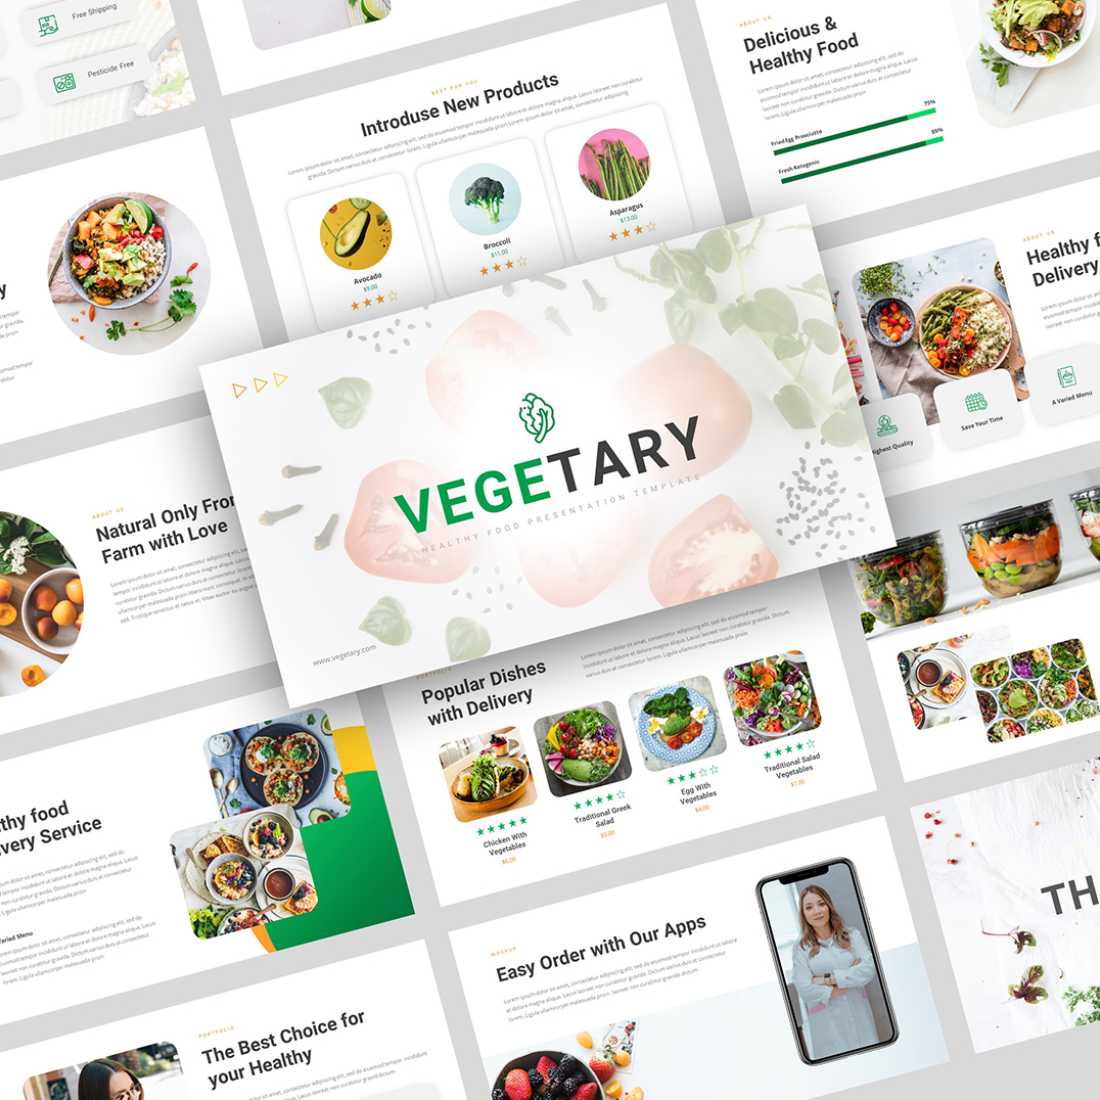 Vegetary - Healthy Food Presentation PowerPoint Template preview image.